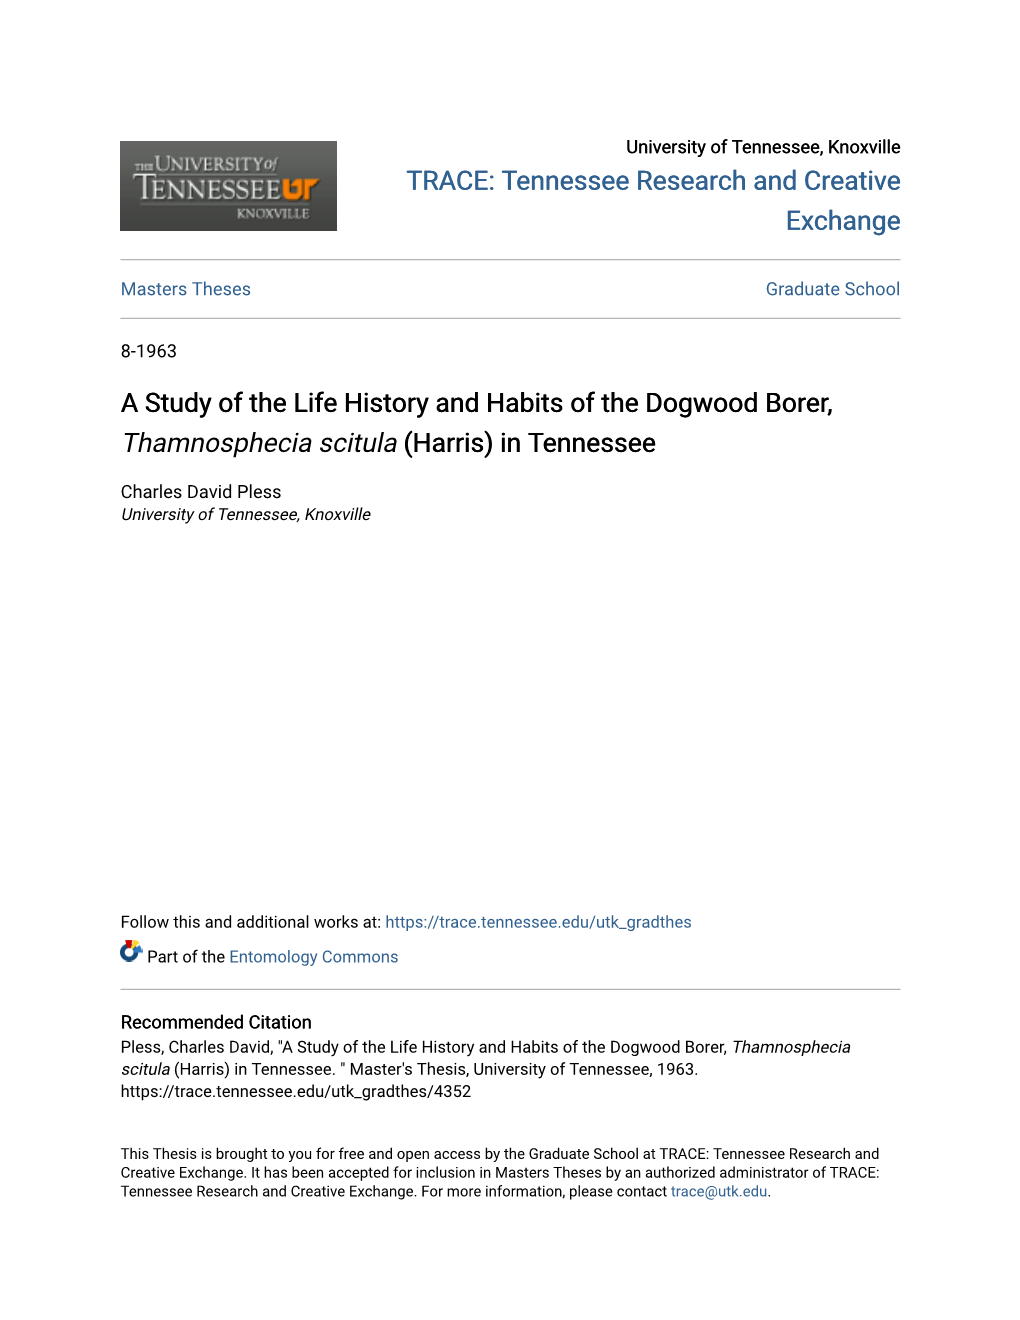 A Study of the Life History and Habits of the Dogwood Borer, Thamnosphecia Scitula (Harris) in Tennessee